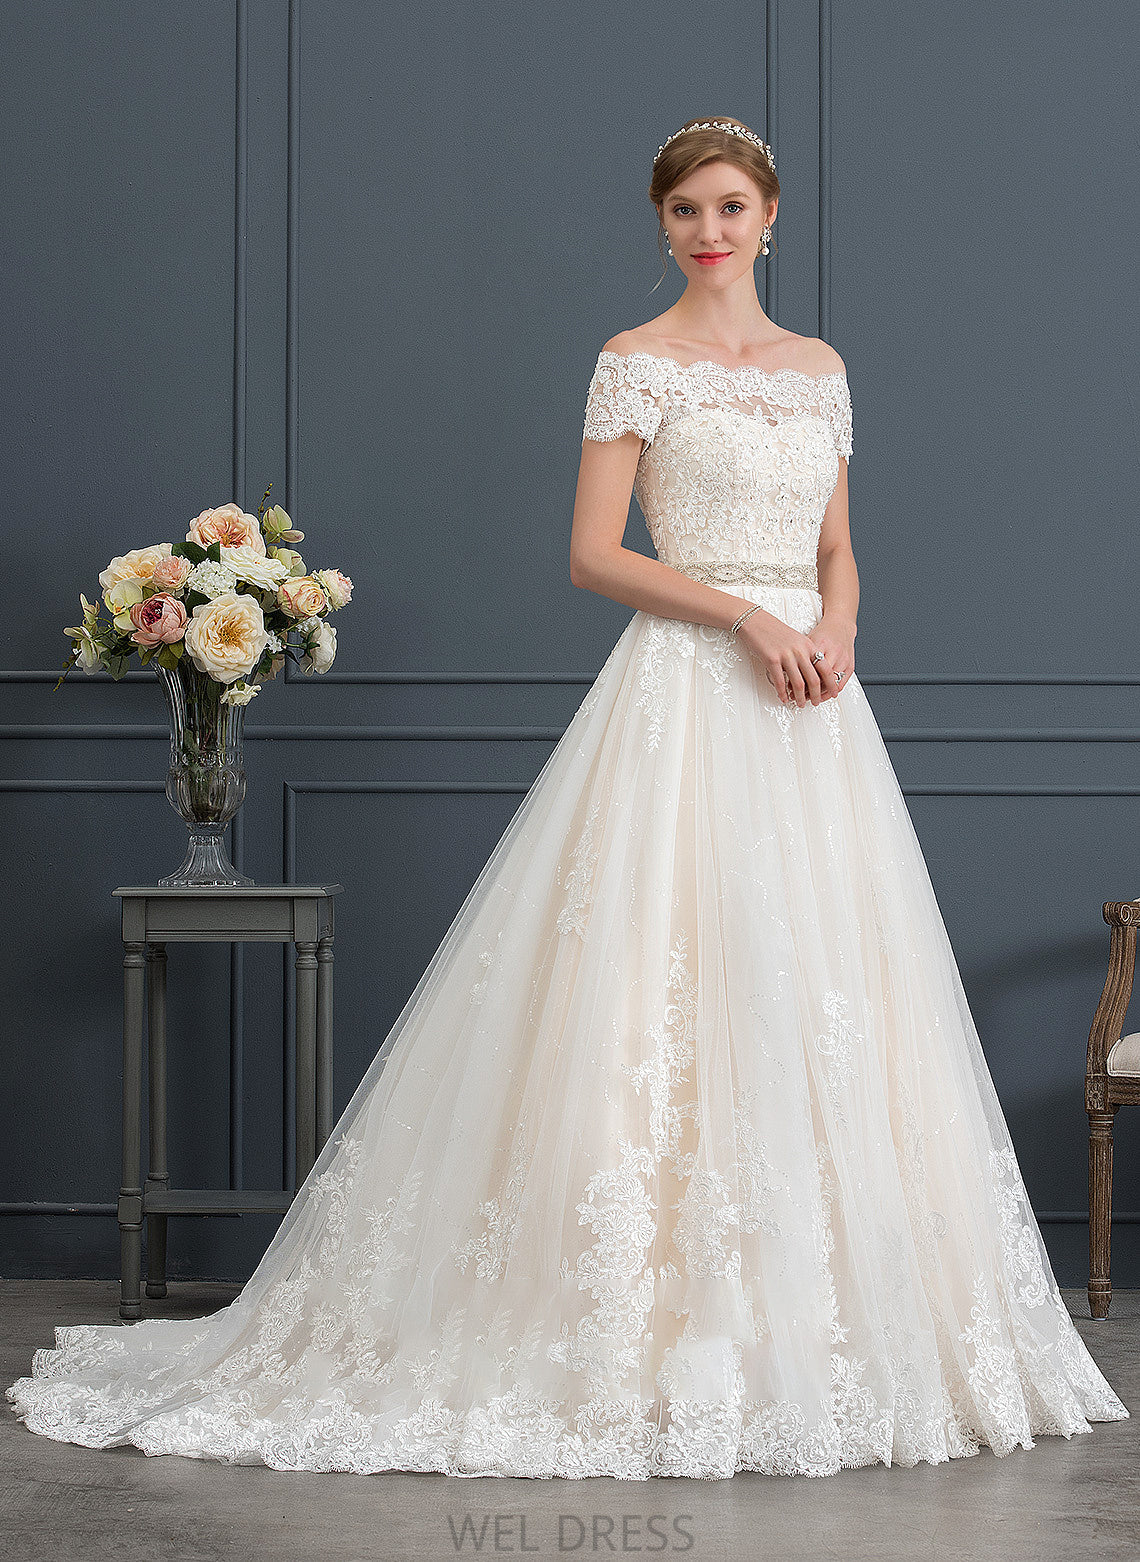 Court Sequins Wedding Dresses With Wedding Ball-Gown/Princess Beading Lilliana Train Tulle Dress